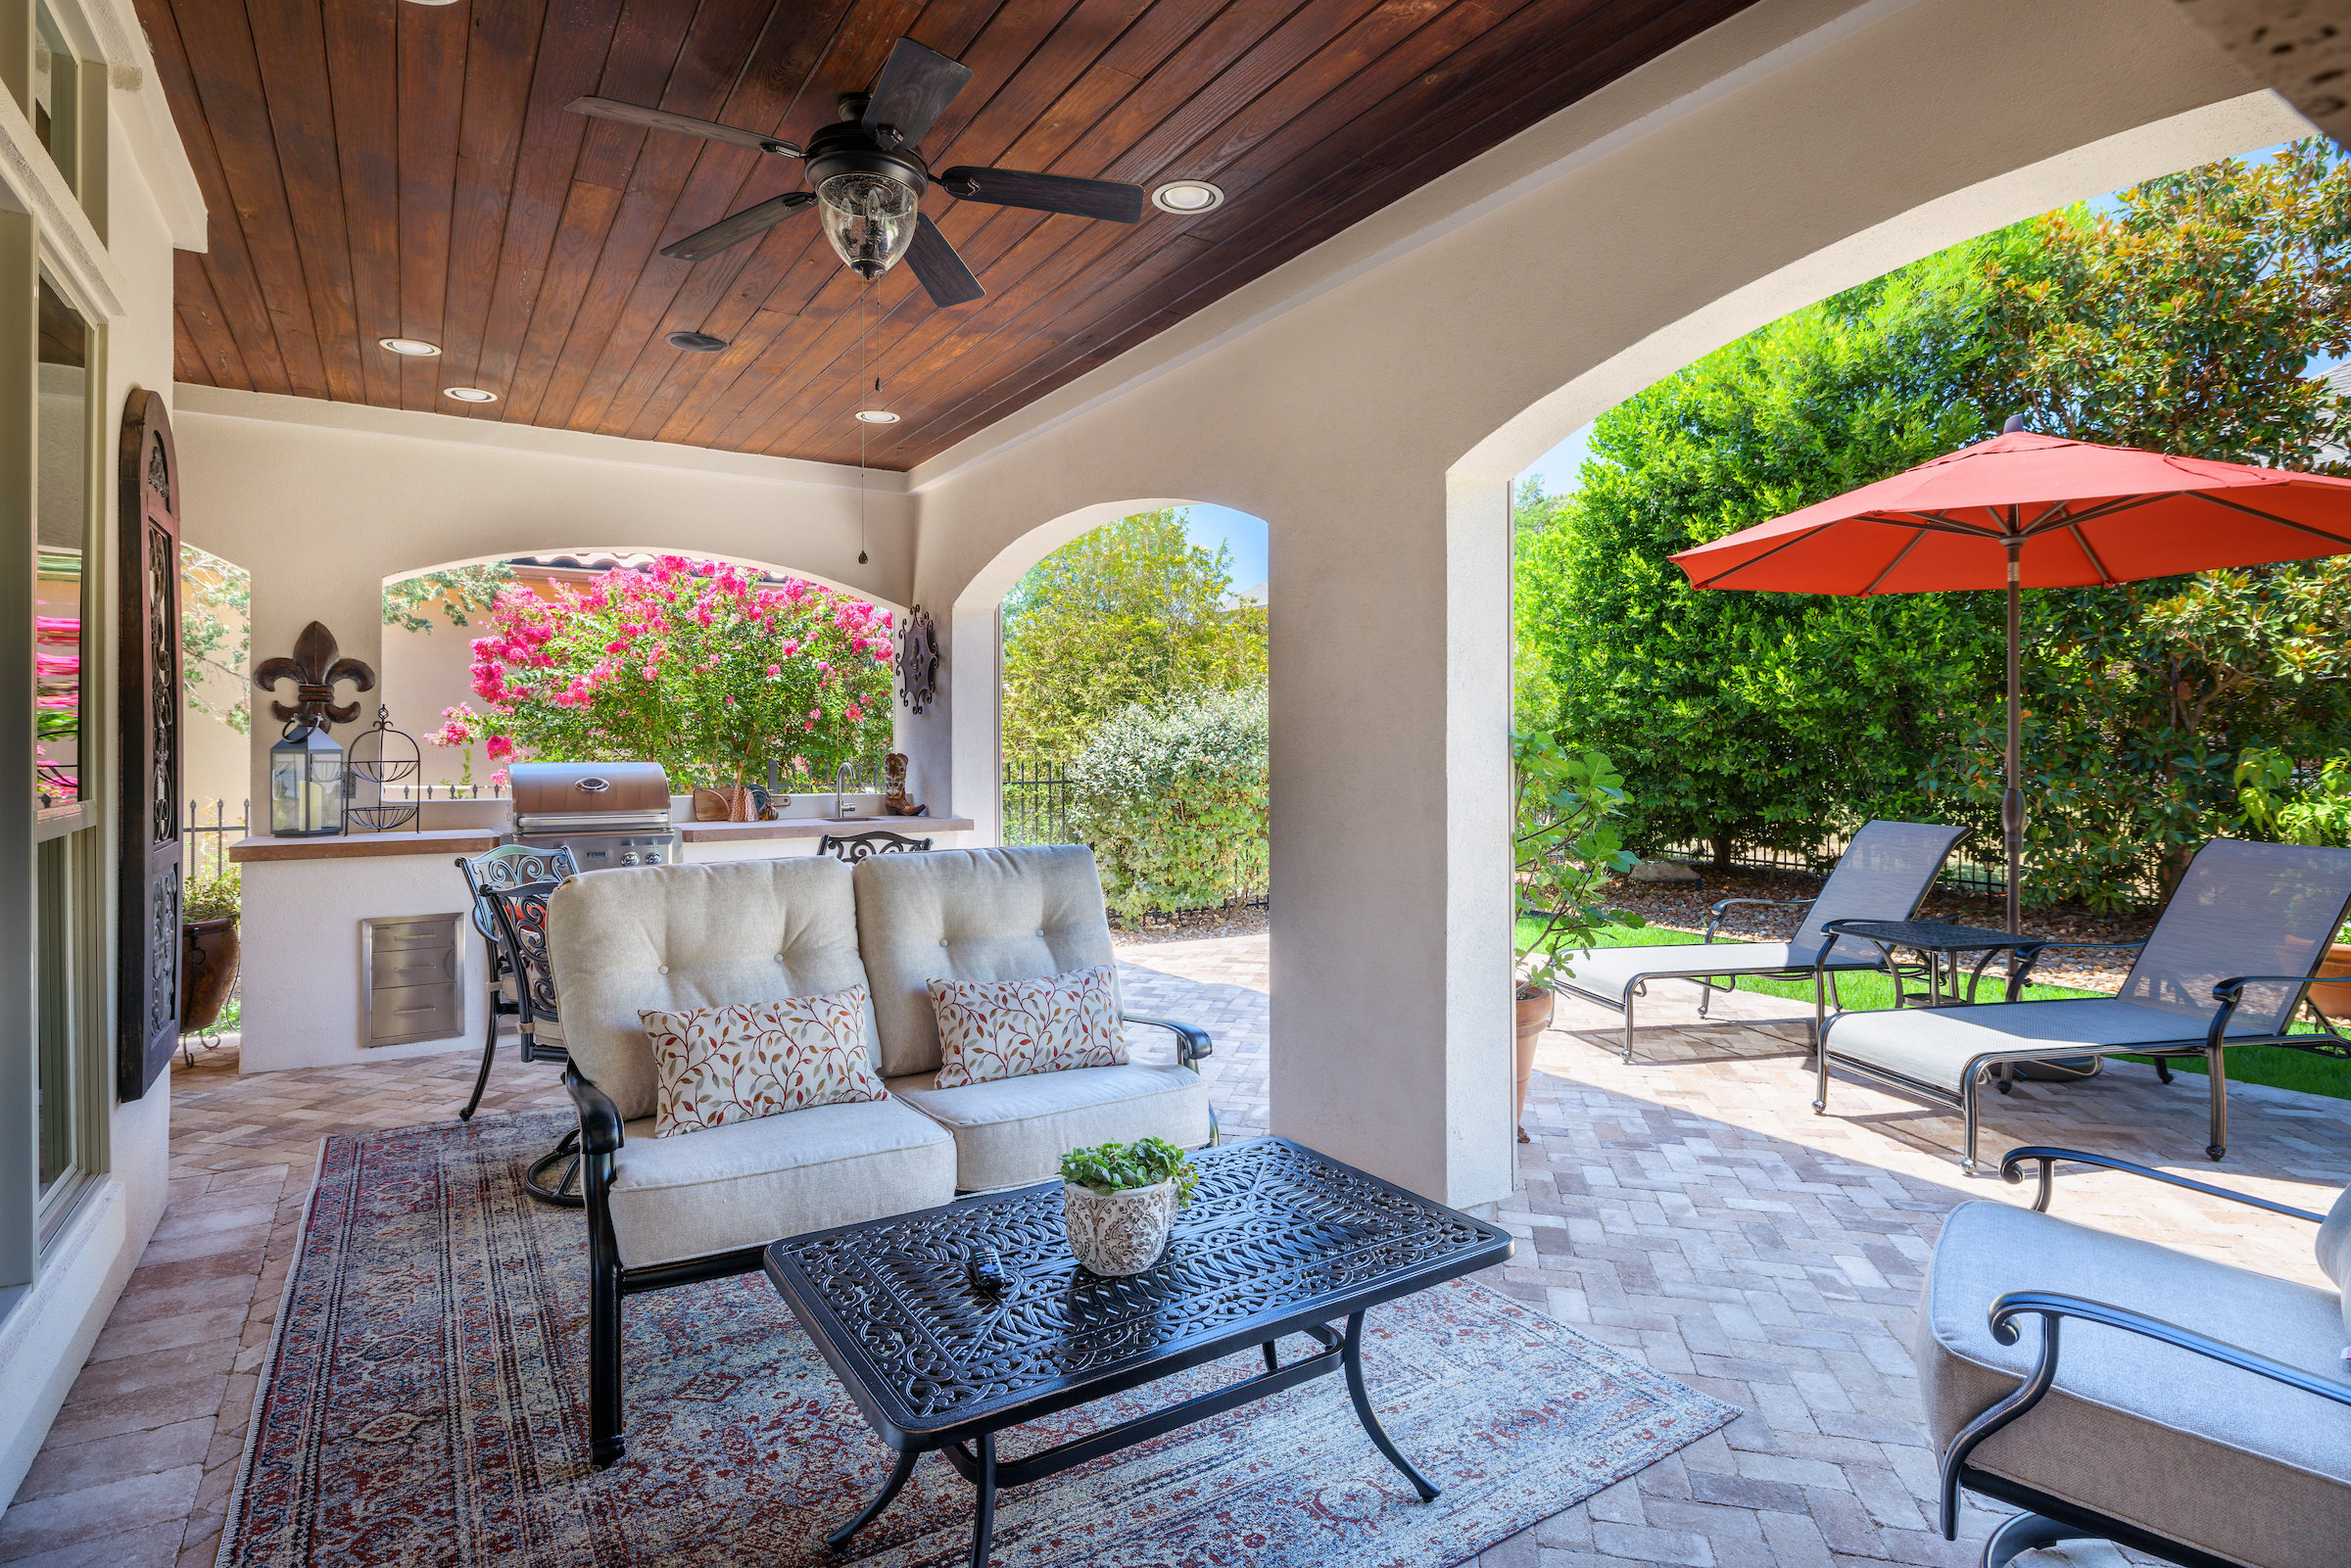 Covered outdoor living space with patio extension, outdoor seating, tables, and outdoor kitchen